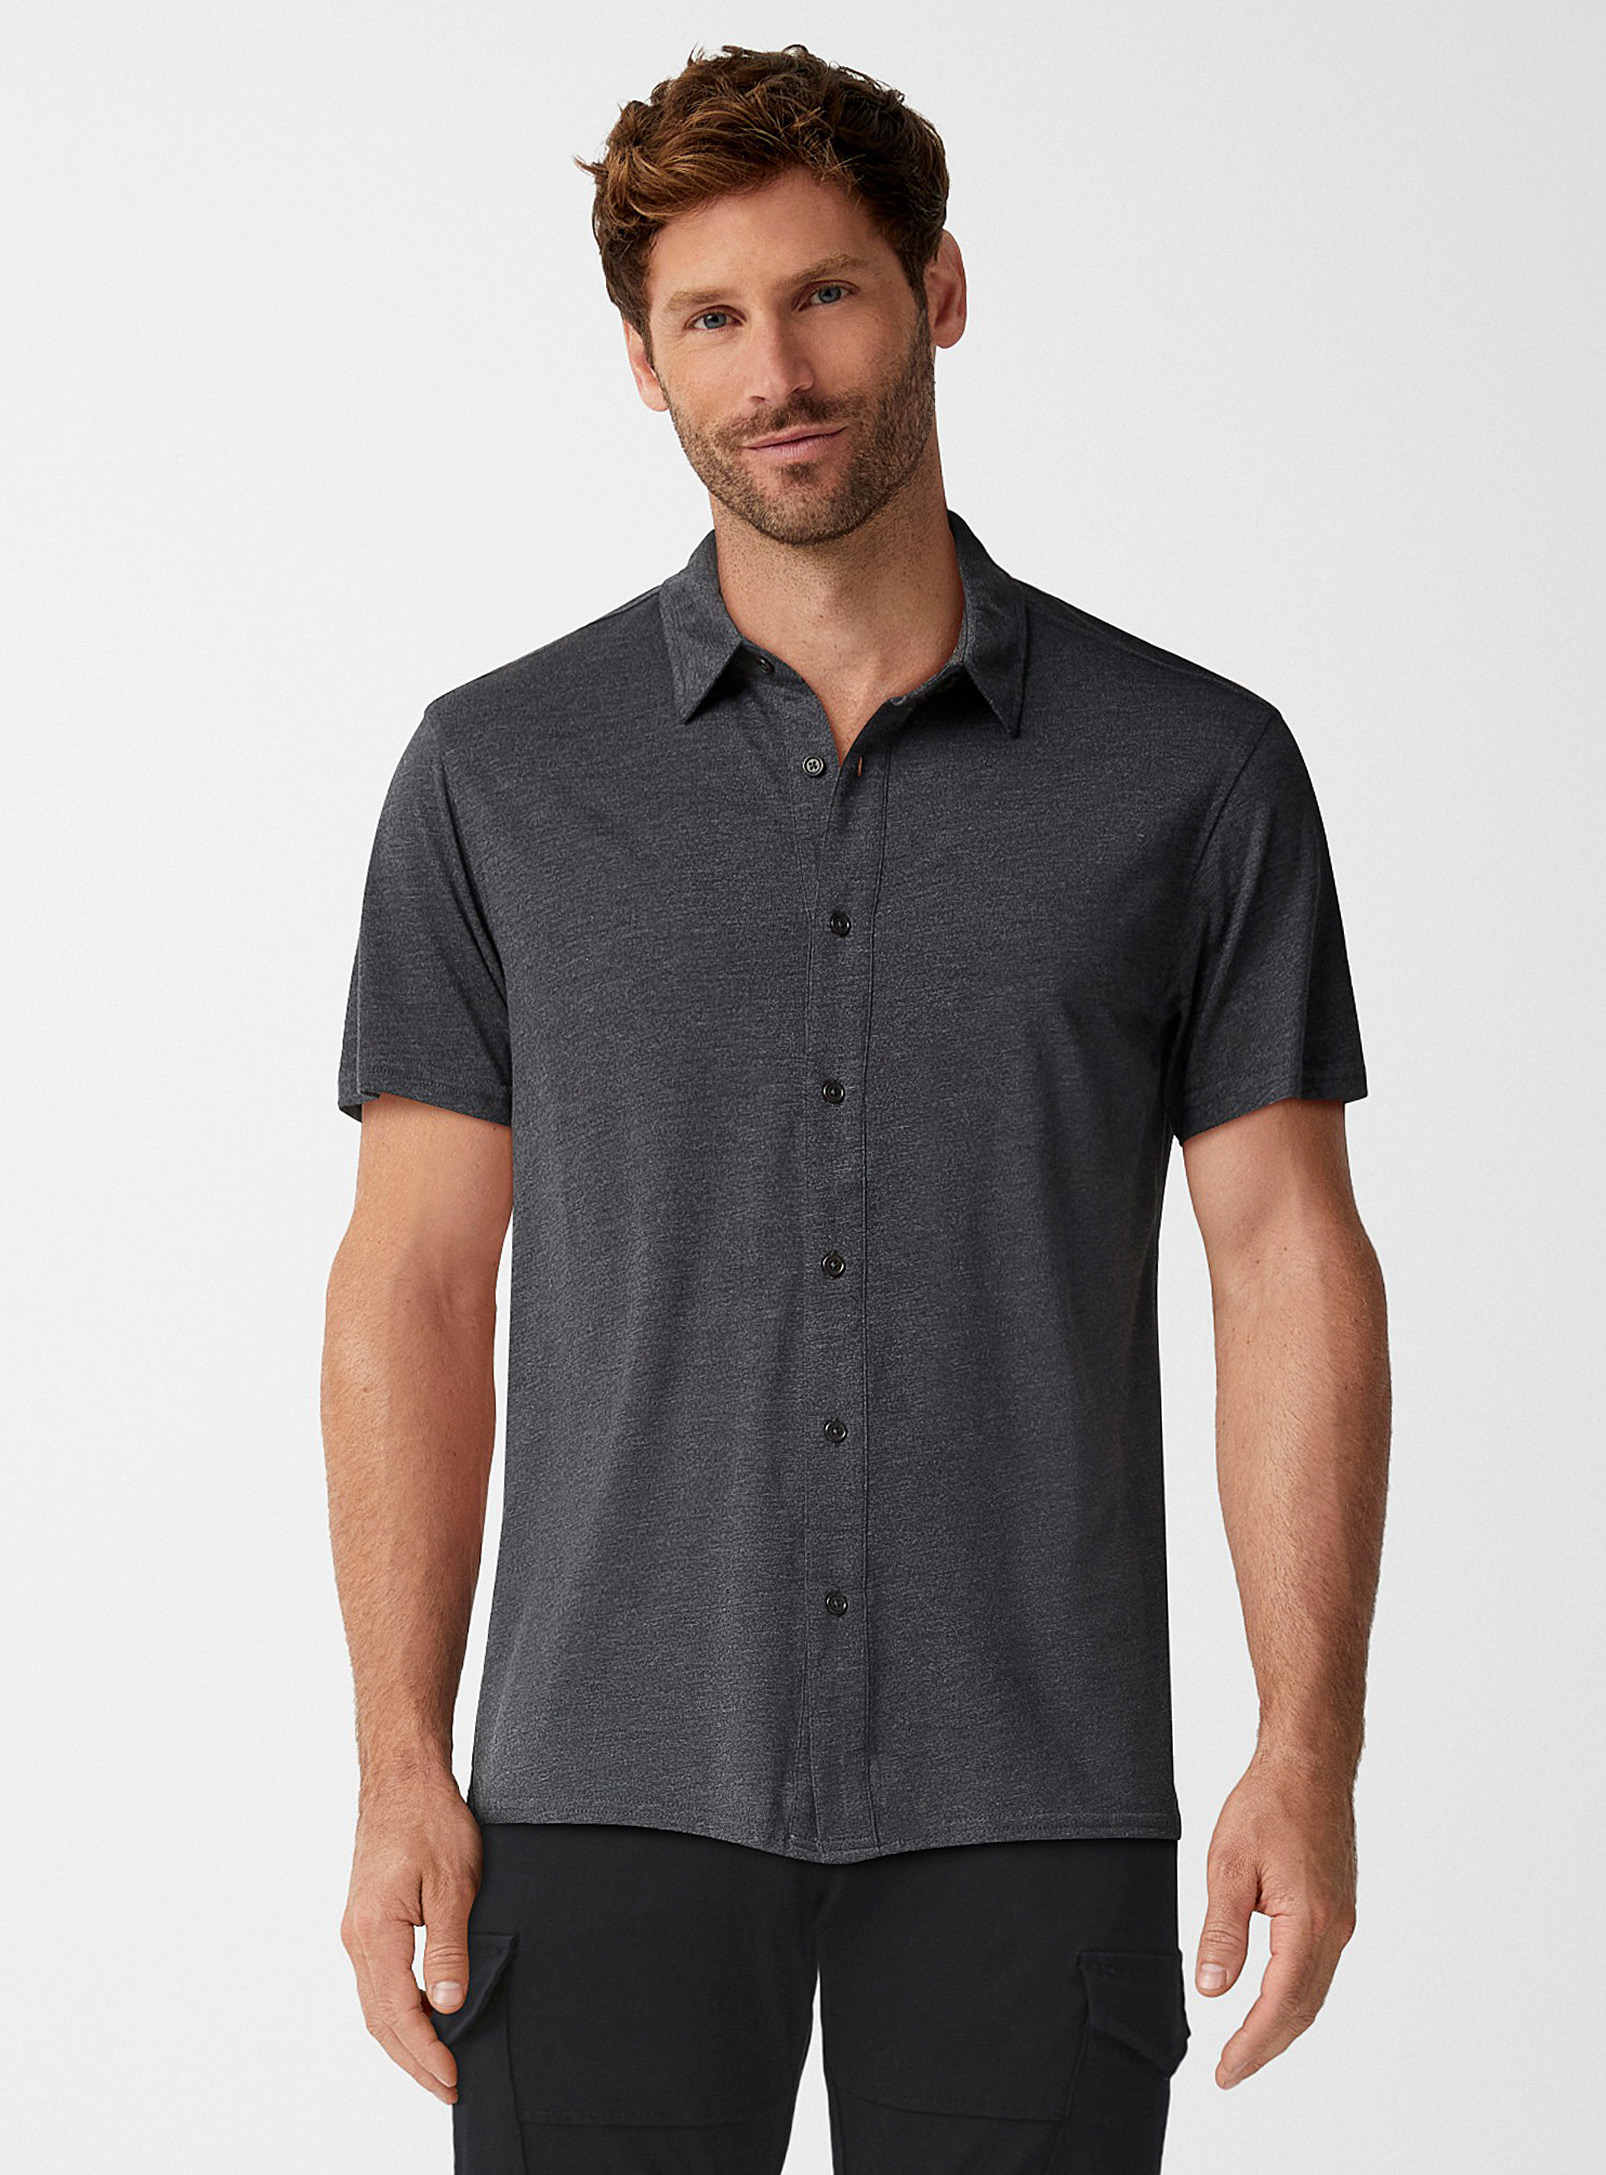 Tentree Heathered Jersey Shirt In Black